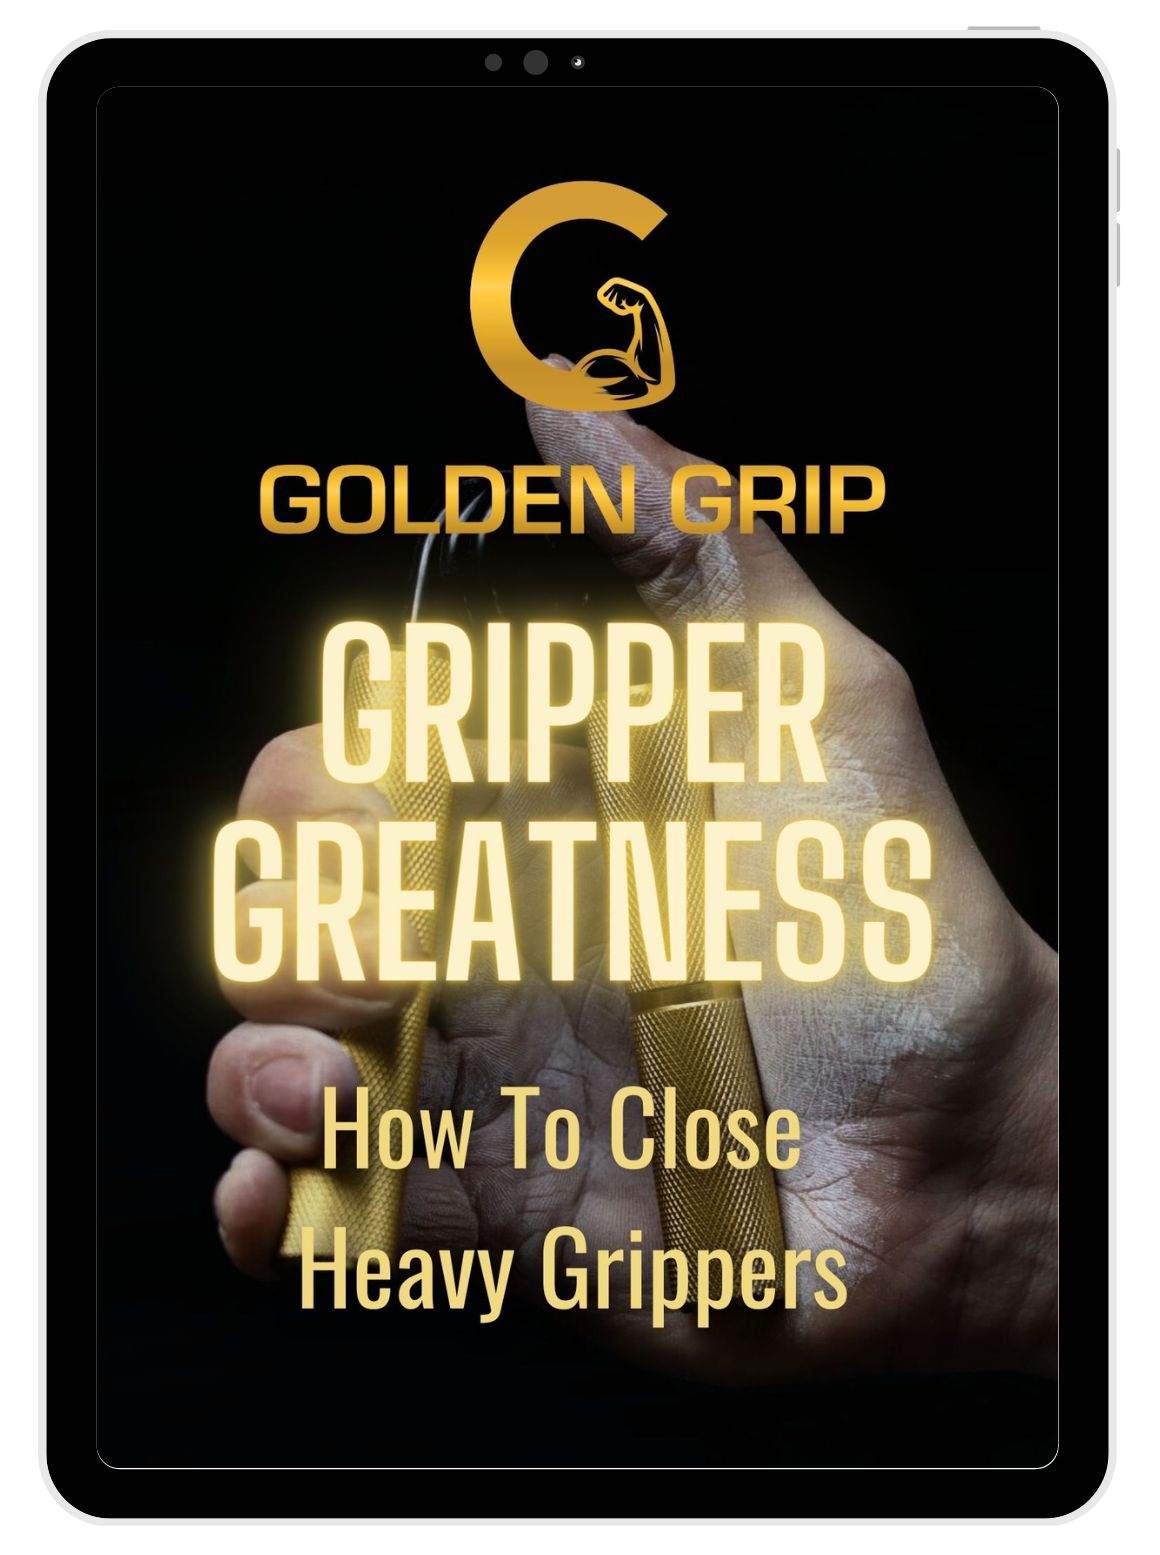 Gripper Greatness: How To Close Heavy Grippers Ebook